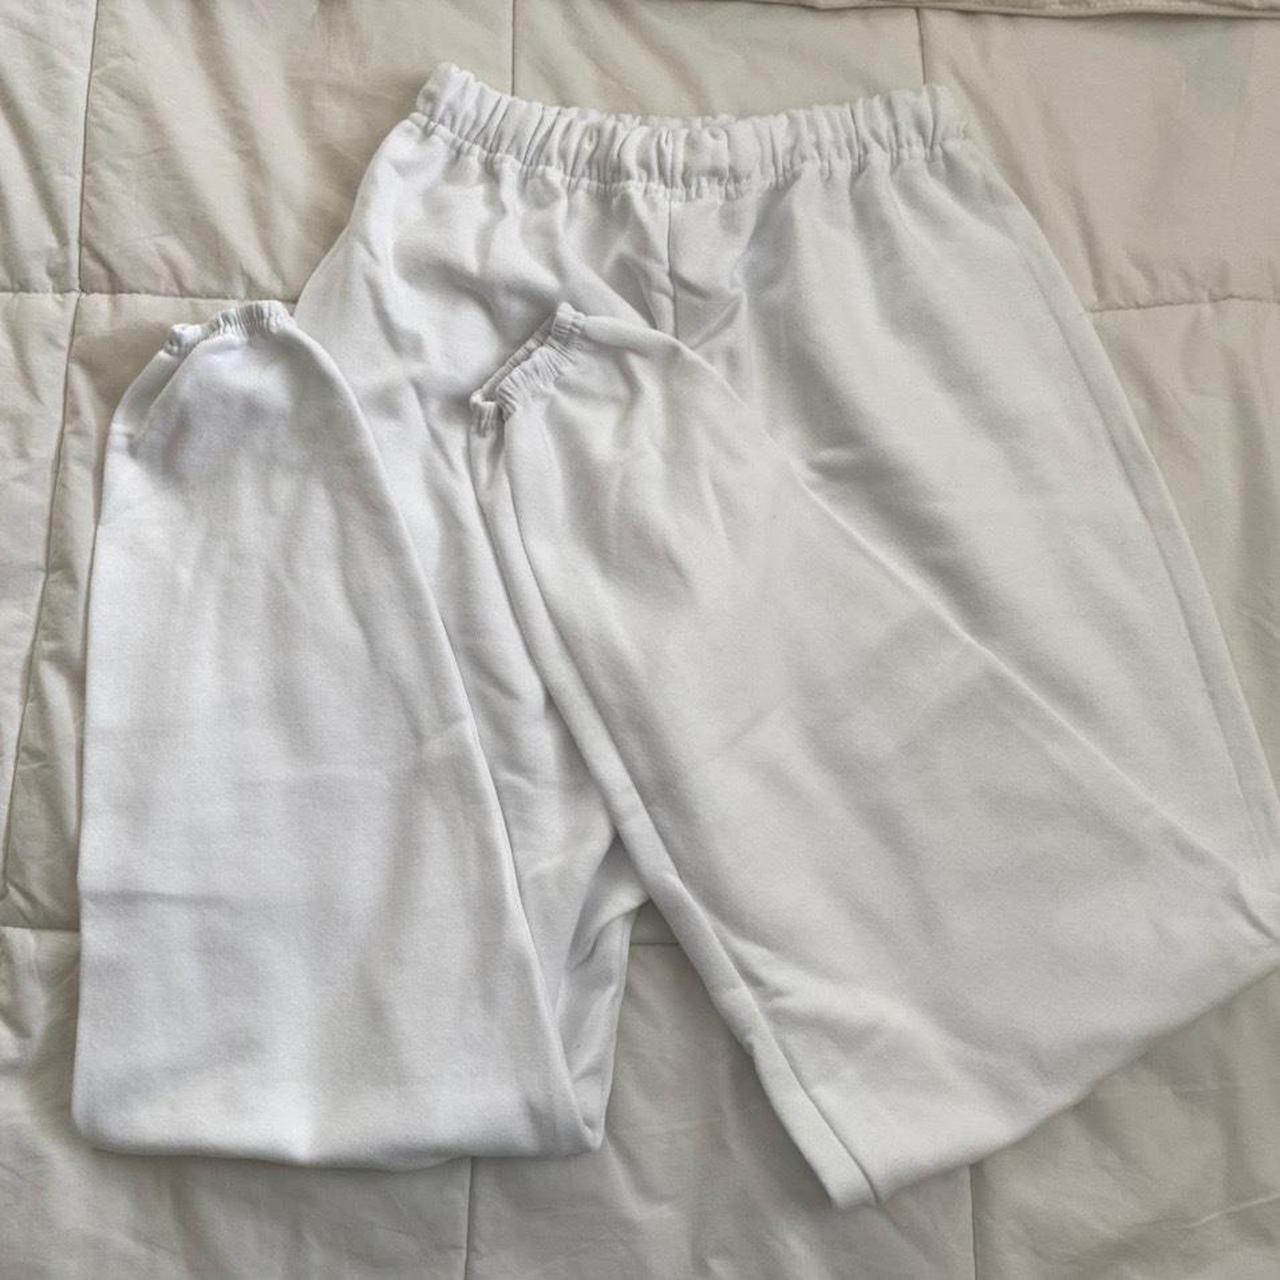 Product Image 1 - Plain white sweatpants with pull